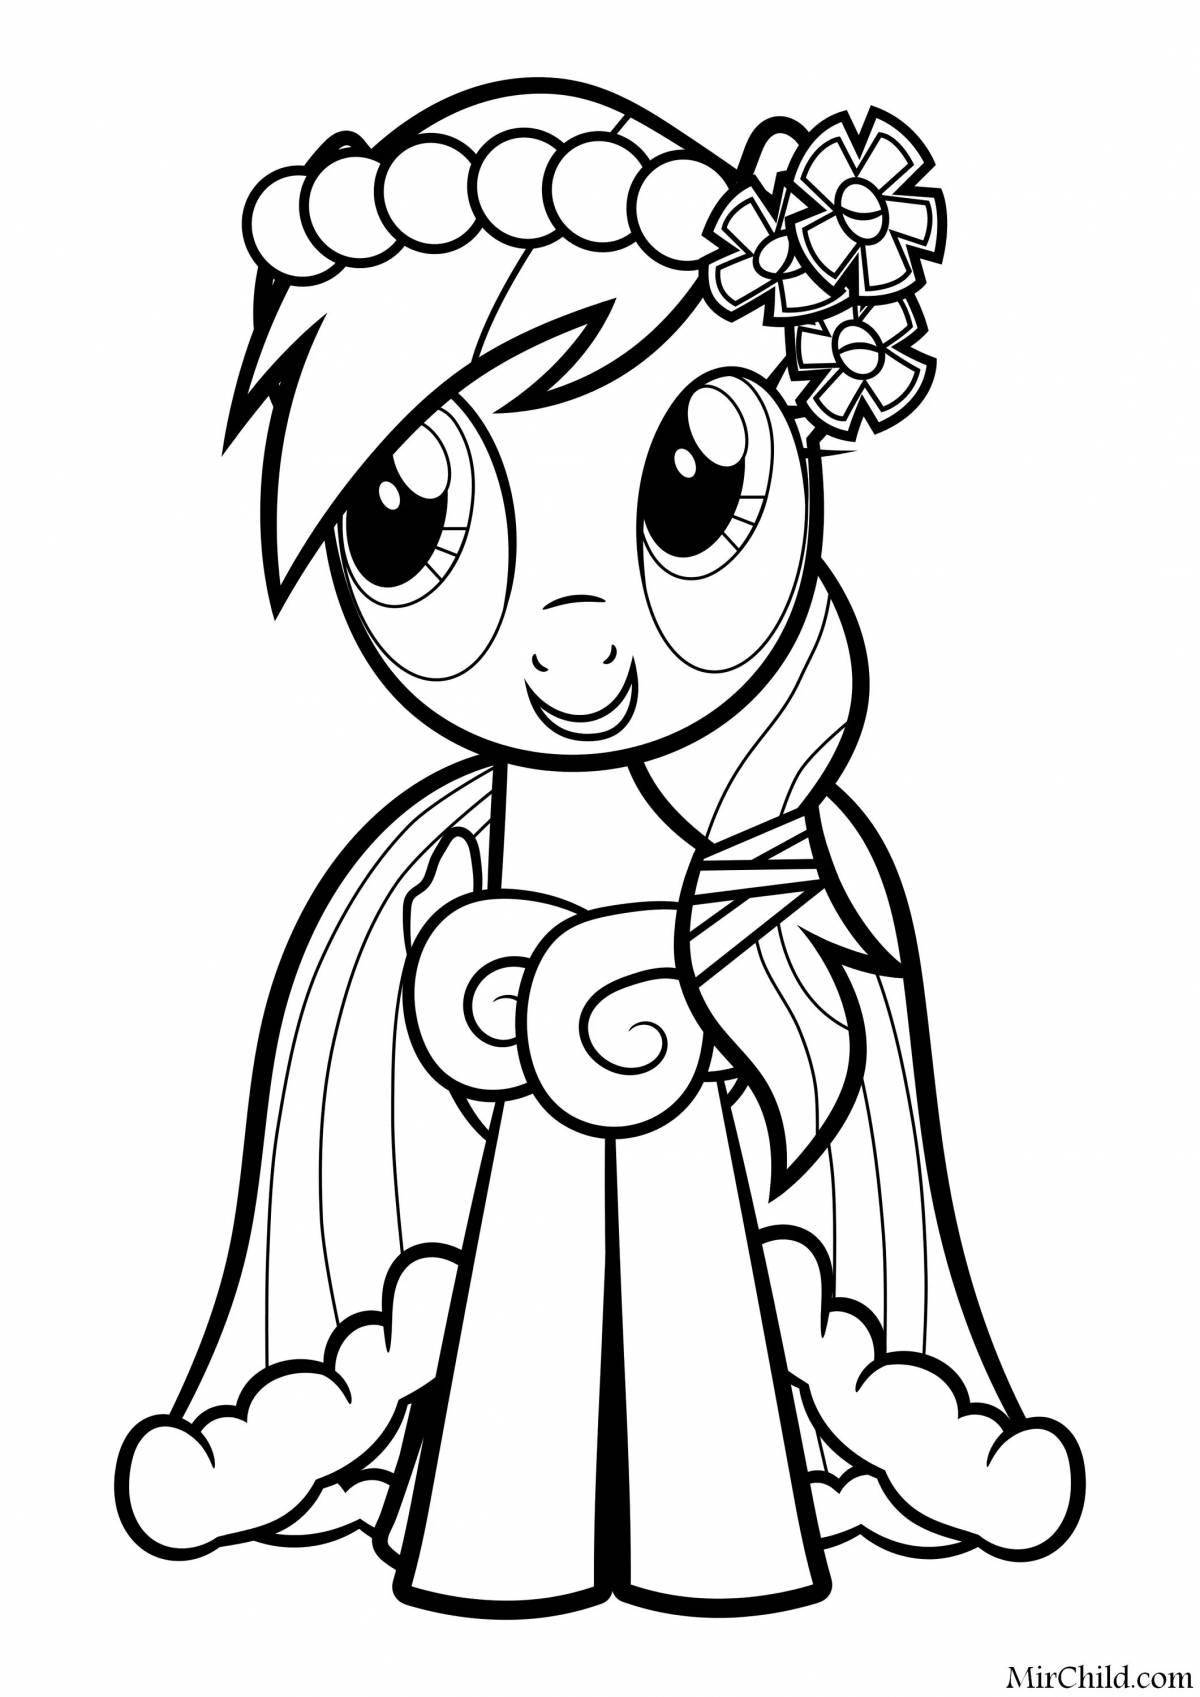 Exquisite pony coloring in dress